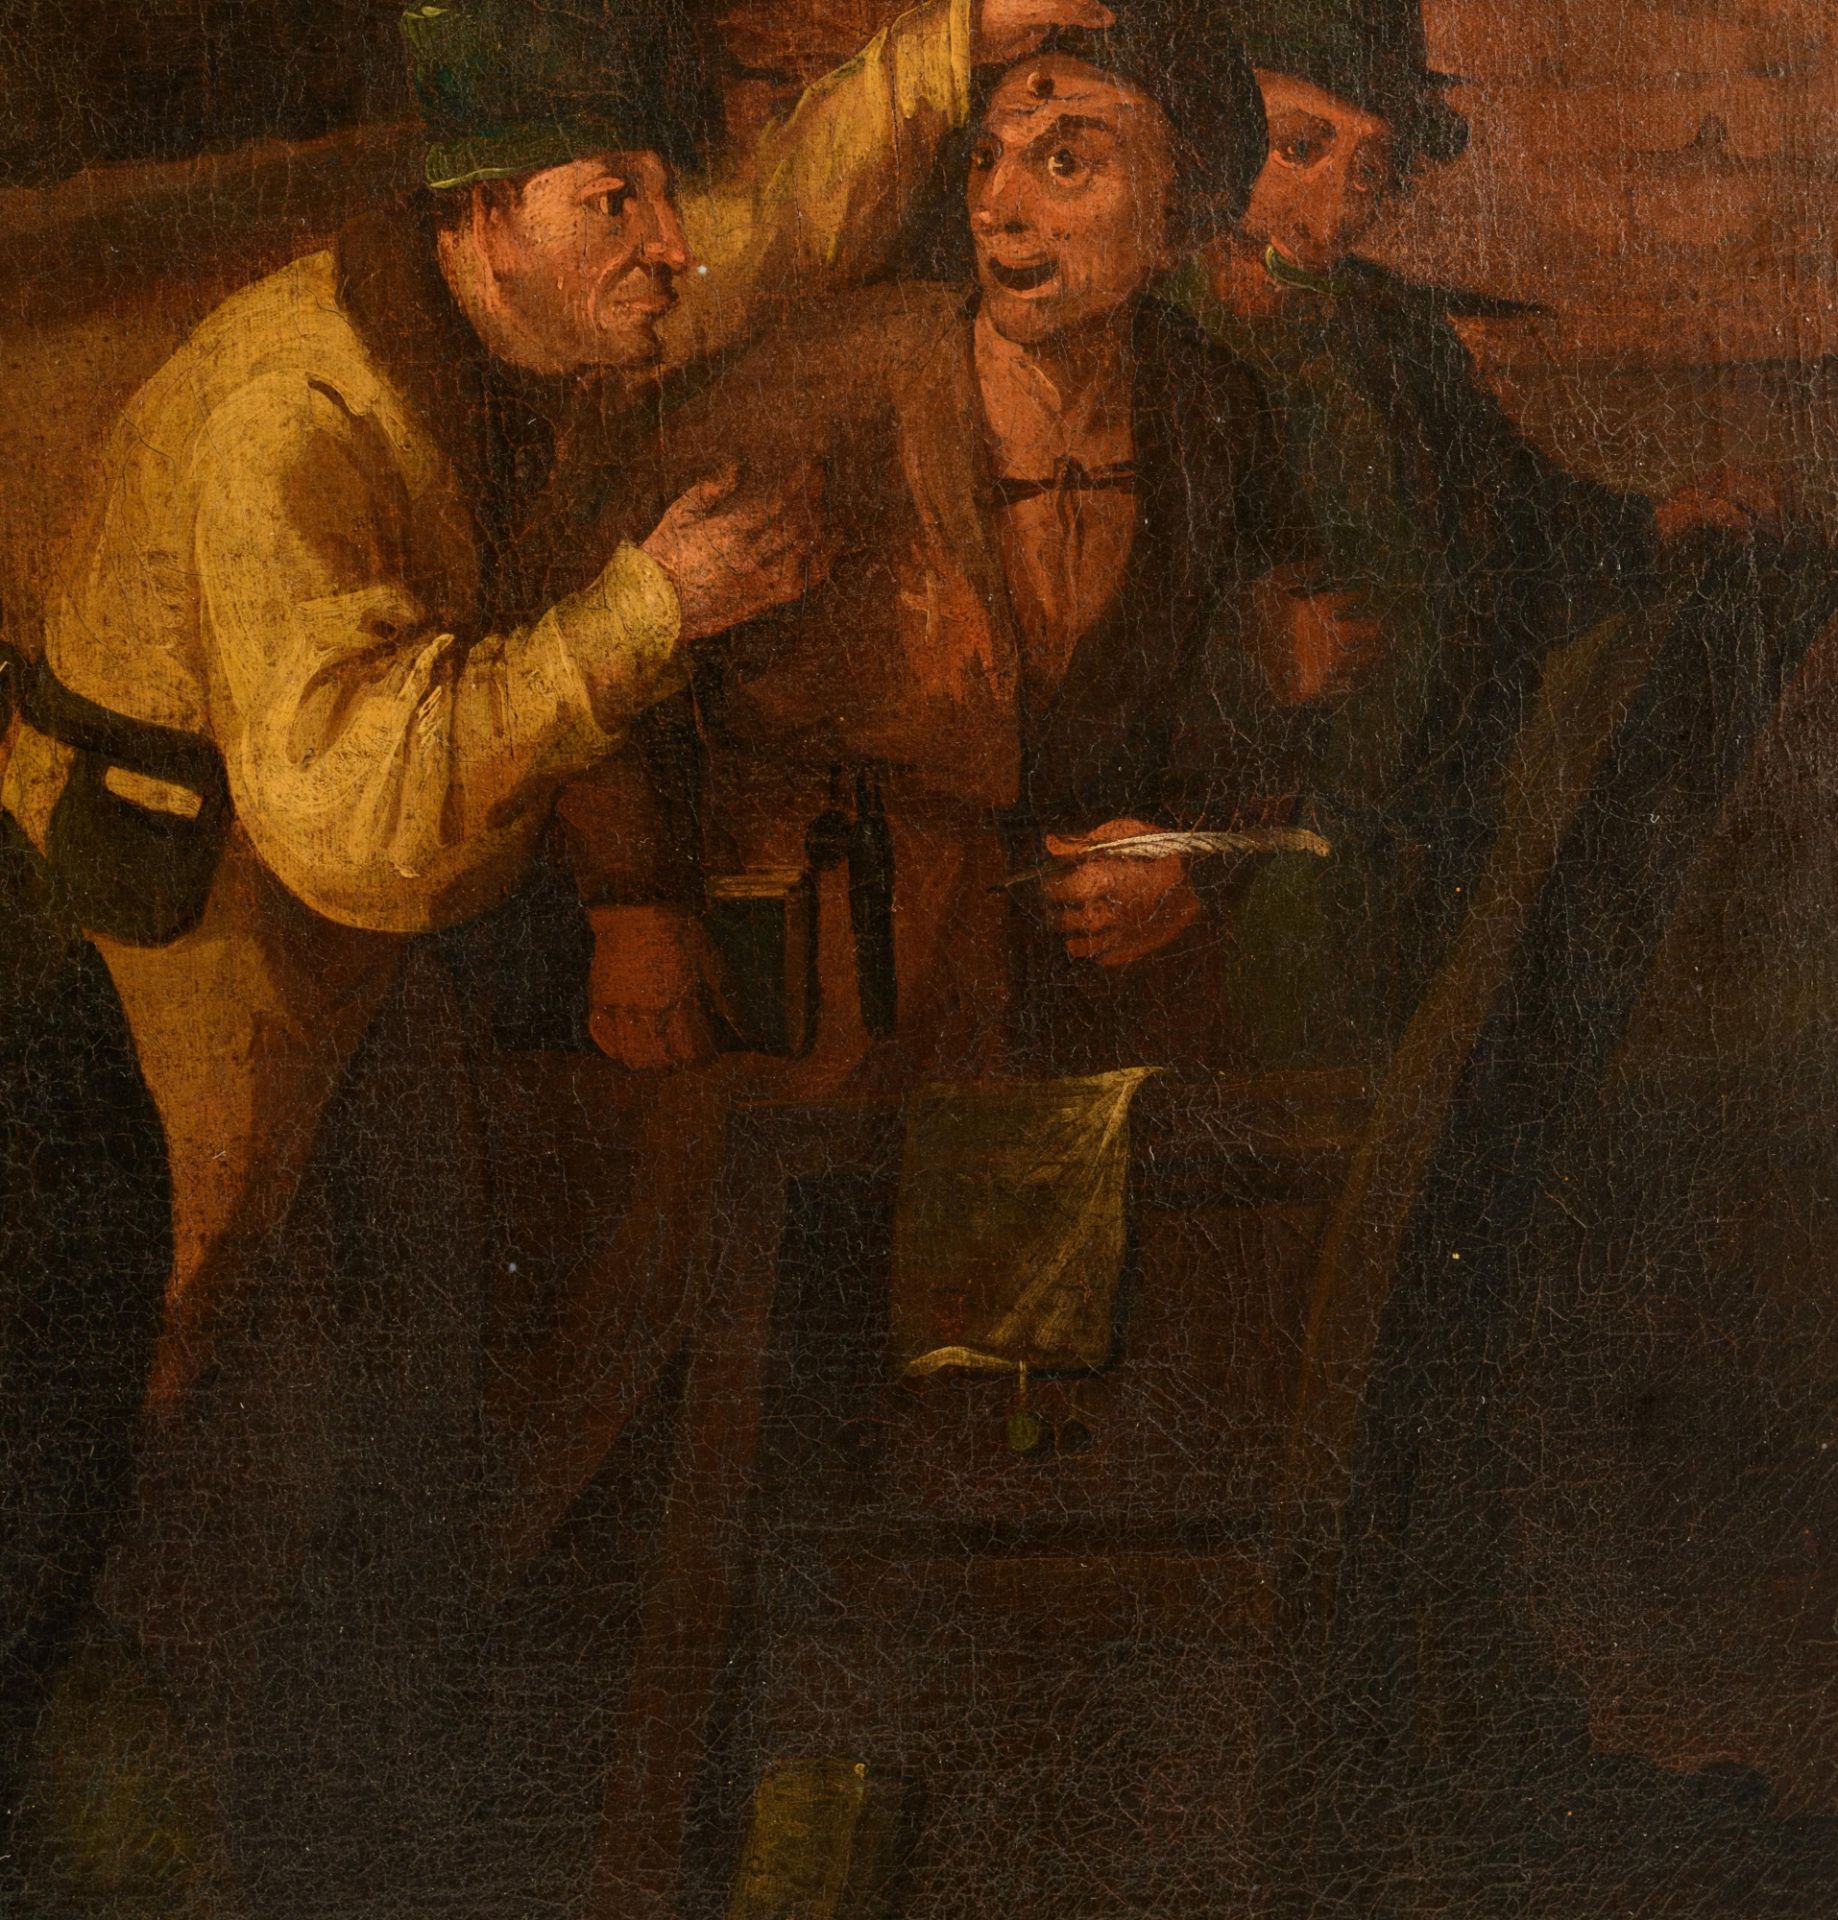 Workshop of Frans Verbeeck I or II, praise of folly, early 17thC, oil on canvas, 106 x 115 cm - Image 6 of 6